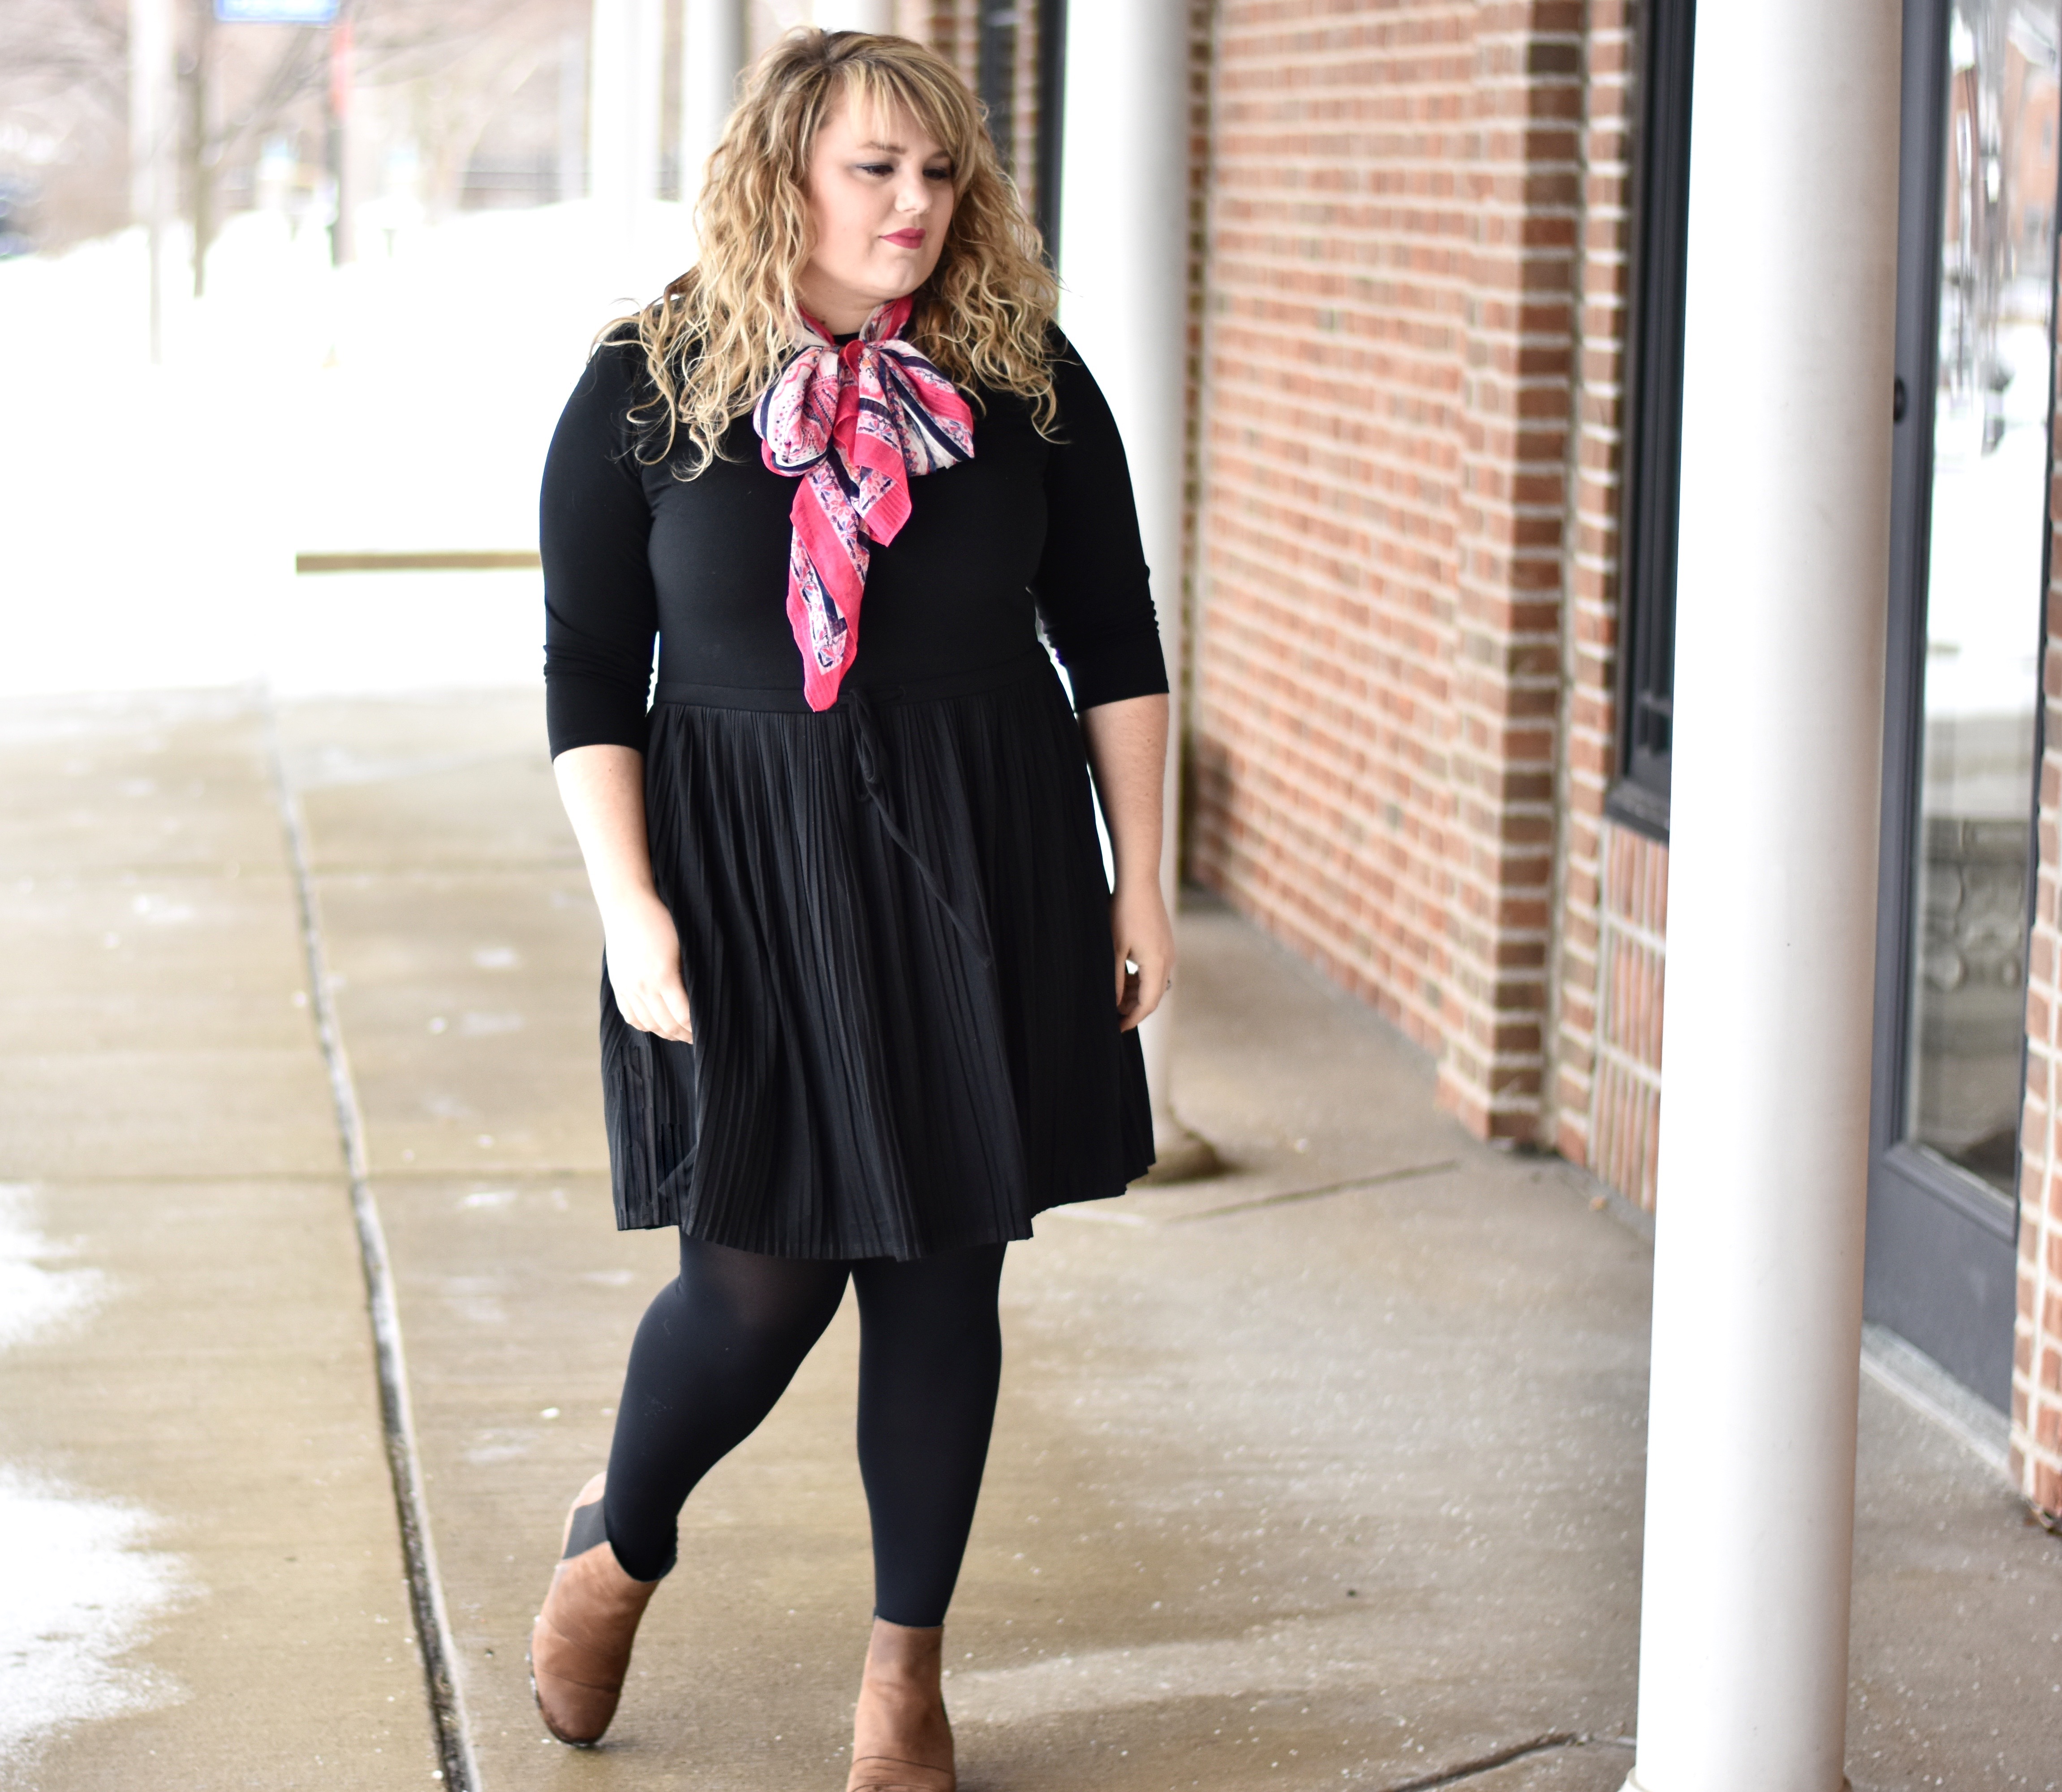 Touch of Spring Style with J.Jill. J.Jill is a brand known for creating relaxed upscale clothing for any women. In this post I am sharing some new pieces that will bring your winter wardrobe into spring.